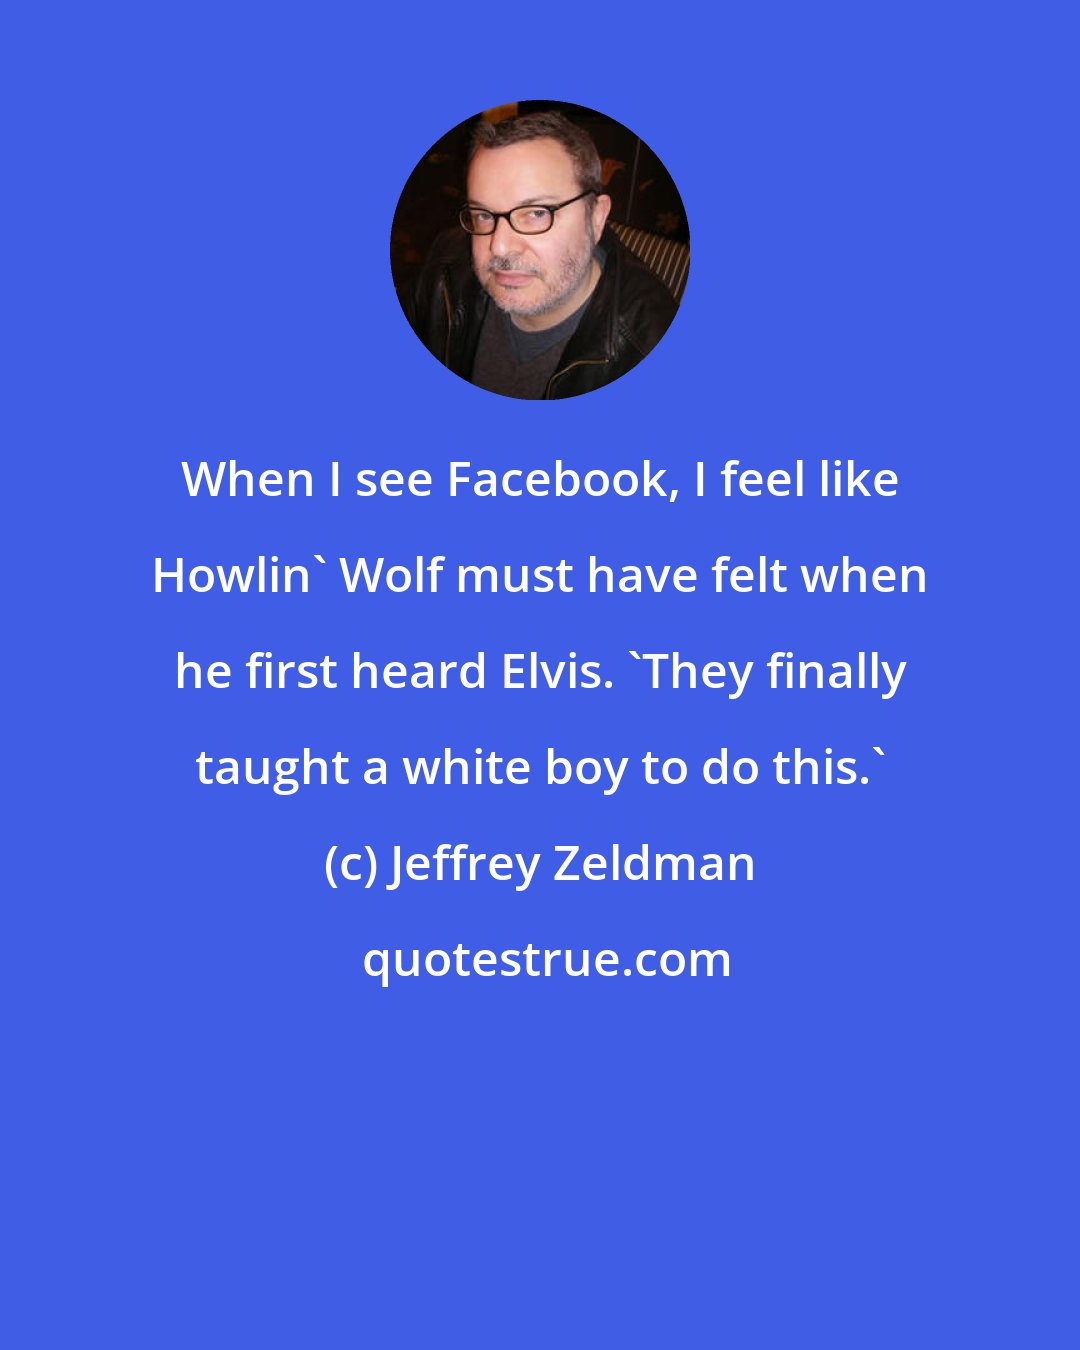 Jeffrey Zeldman: When I see Facebook, I feel like Howlin' Wolf must have felt when he first heard Elvis. 'They finally taught a white boy to do this.'